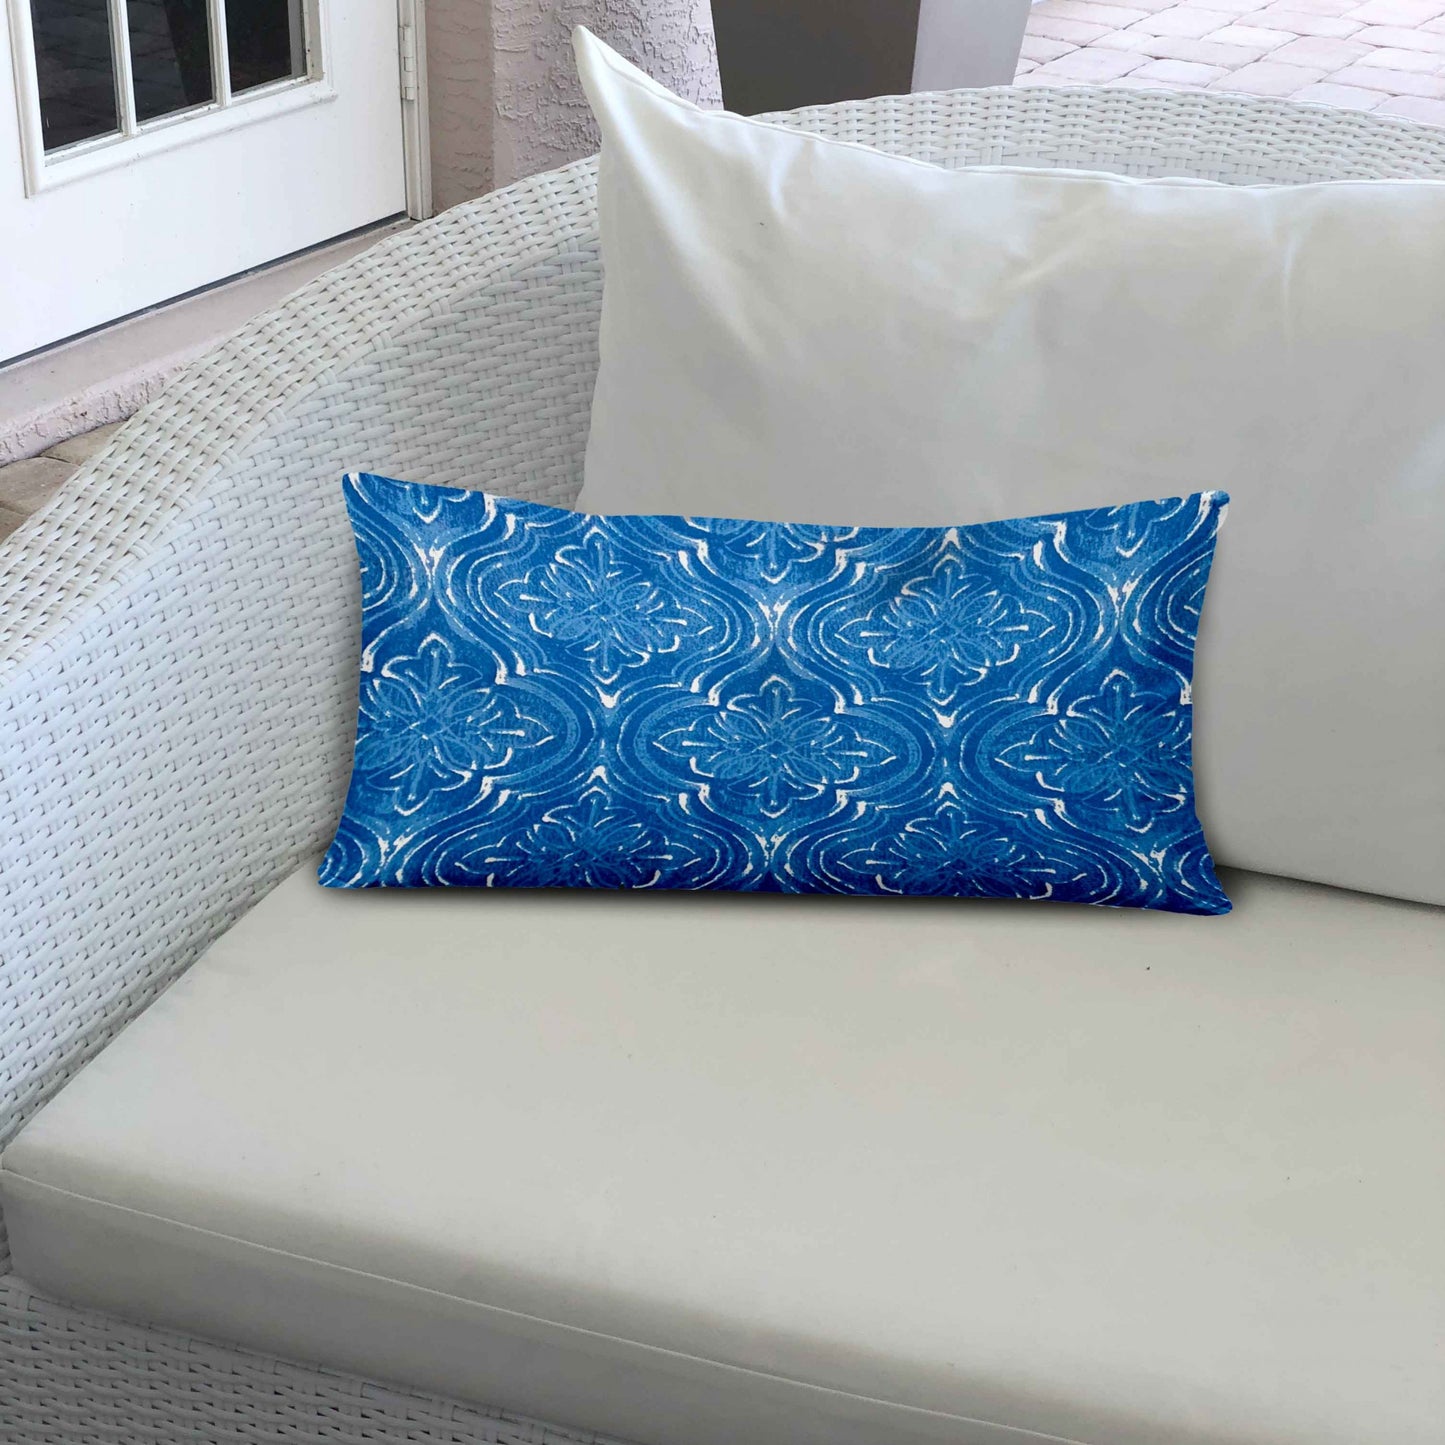 14" X 24" Blue And White Enveloped Ogee Lumbar Indoor Outdoor Pillow Cover